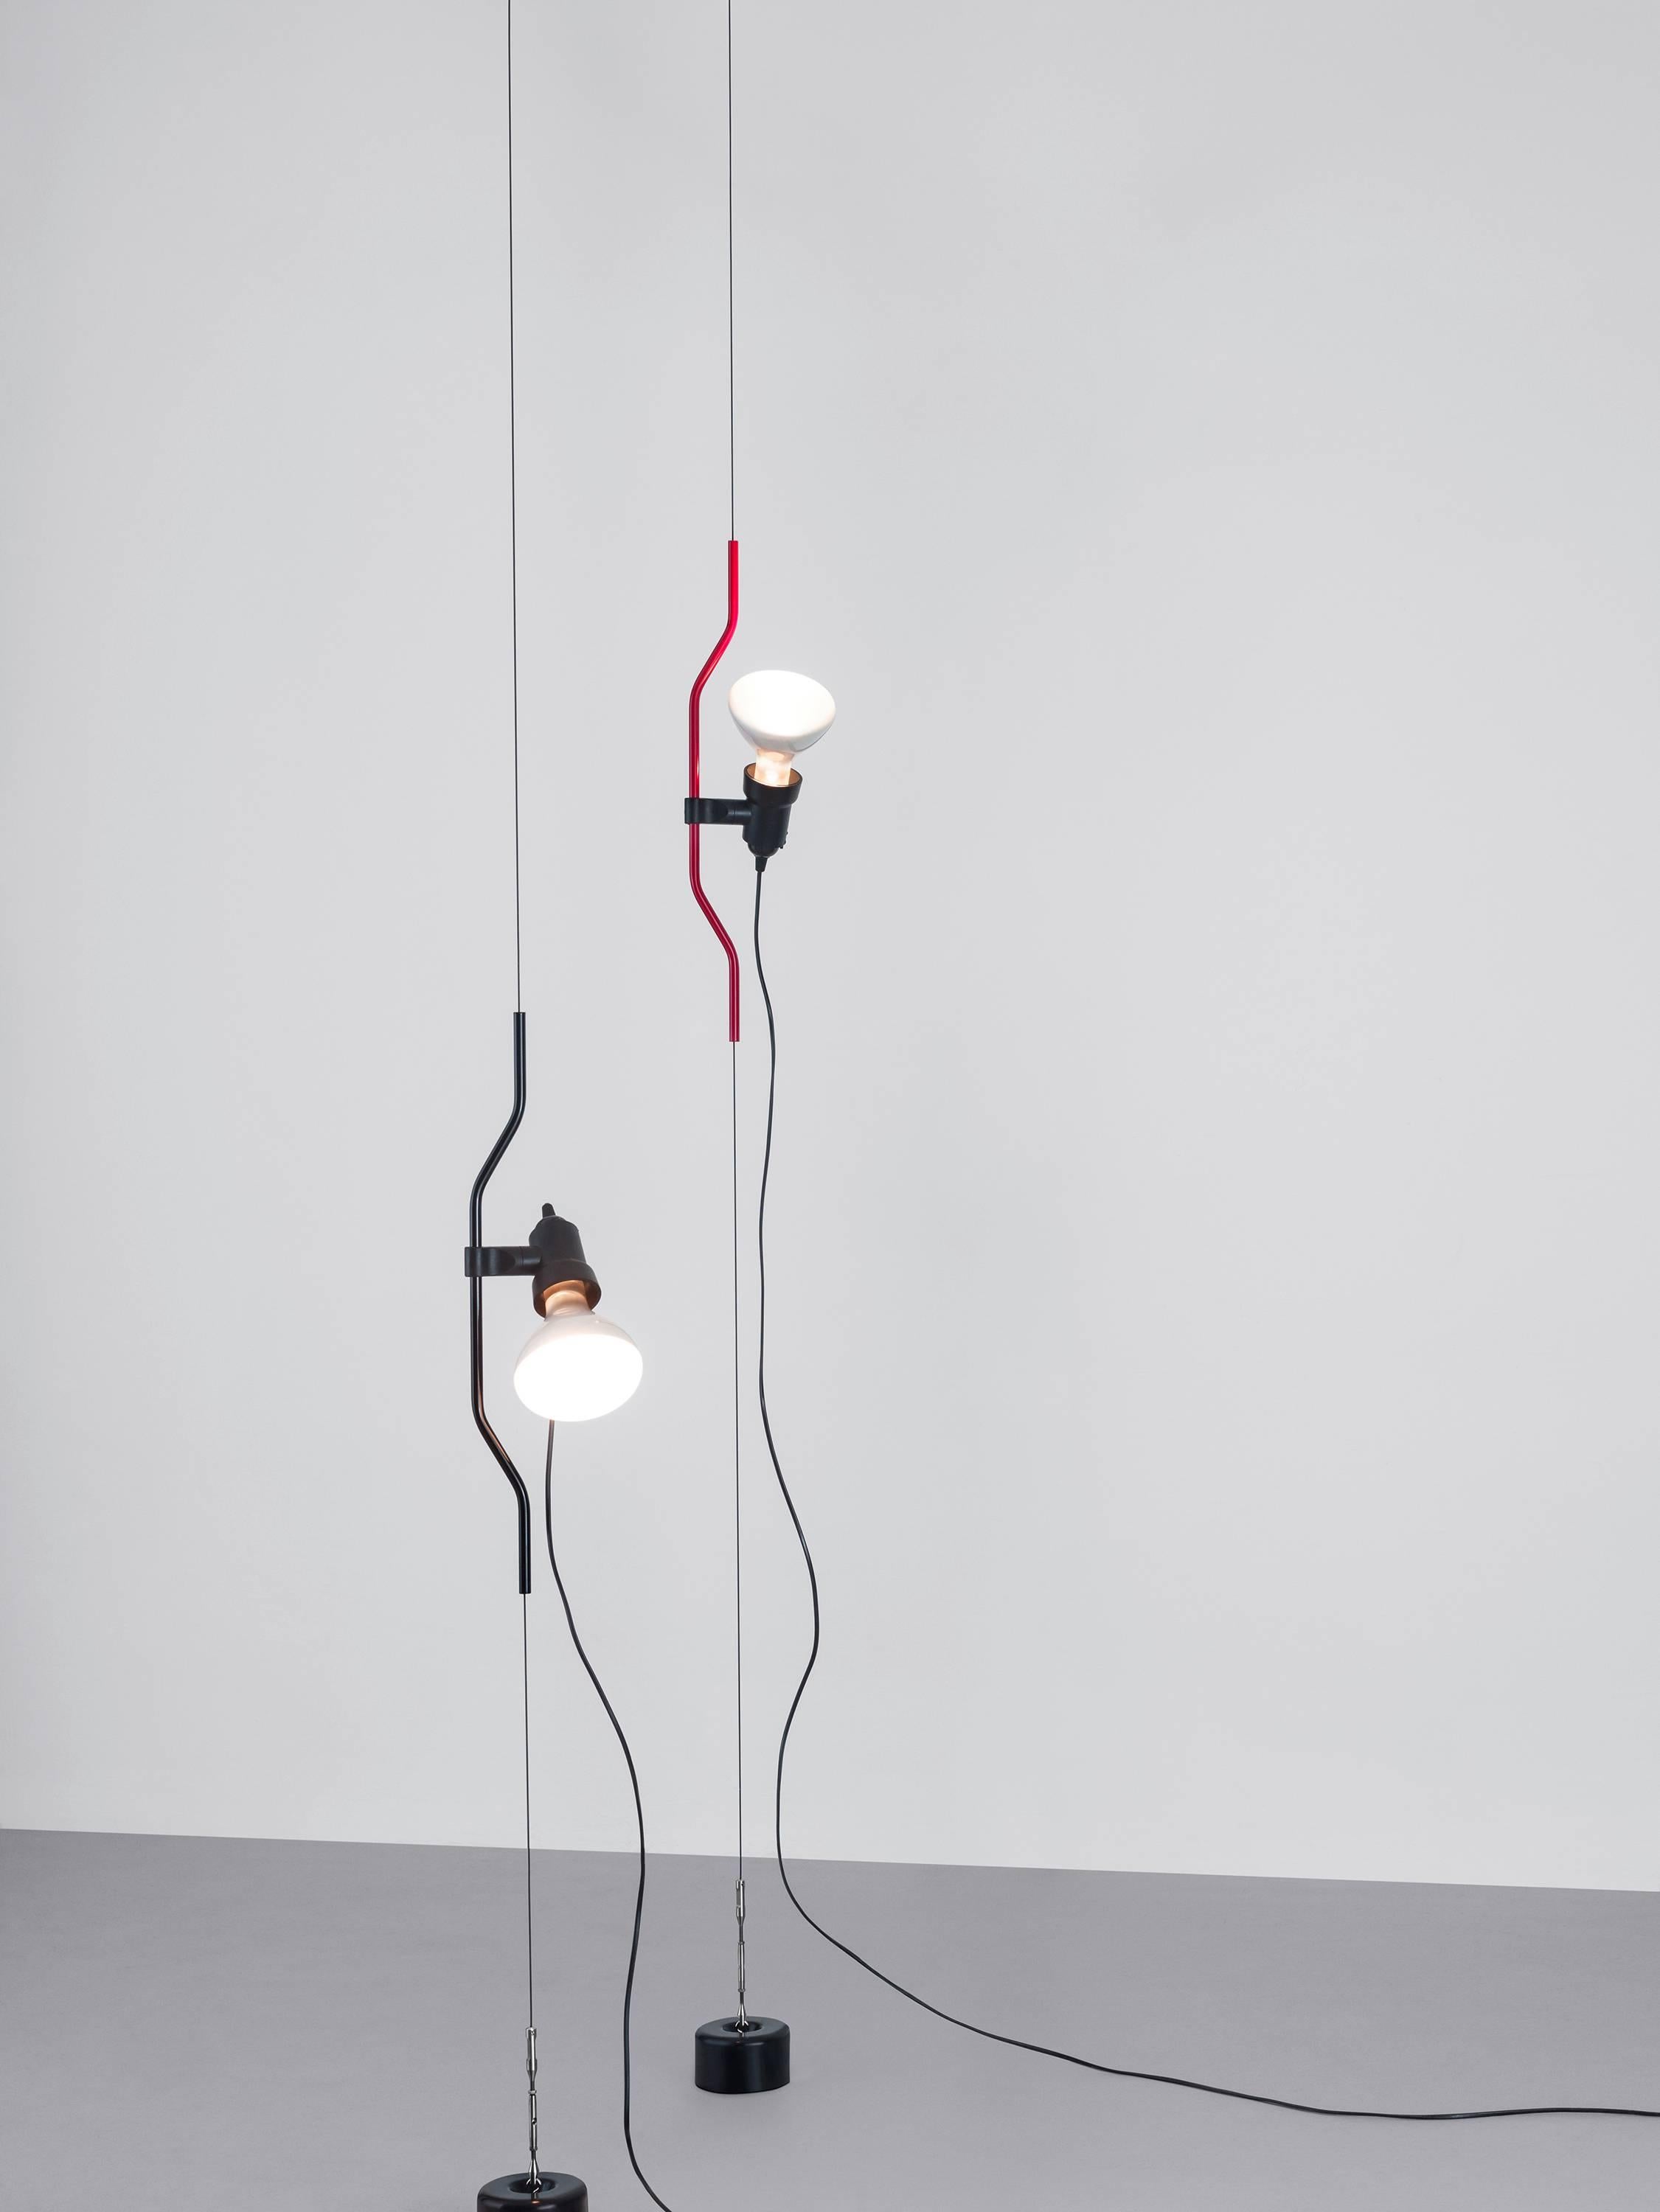 Borne out of a 1971 collaboration between Achille Castiglioni and Pio Manzù, the Parentesi was named for the parenthesis symbol—a visual reference to the nickel-plated shaped tube that lives on a floor-to-ceiling steel cable. The steel cable can